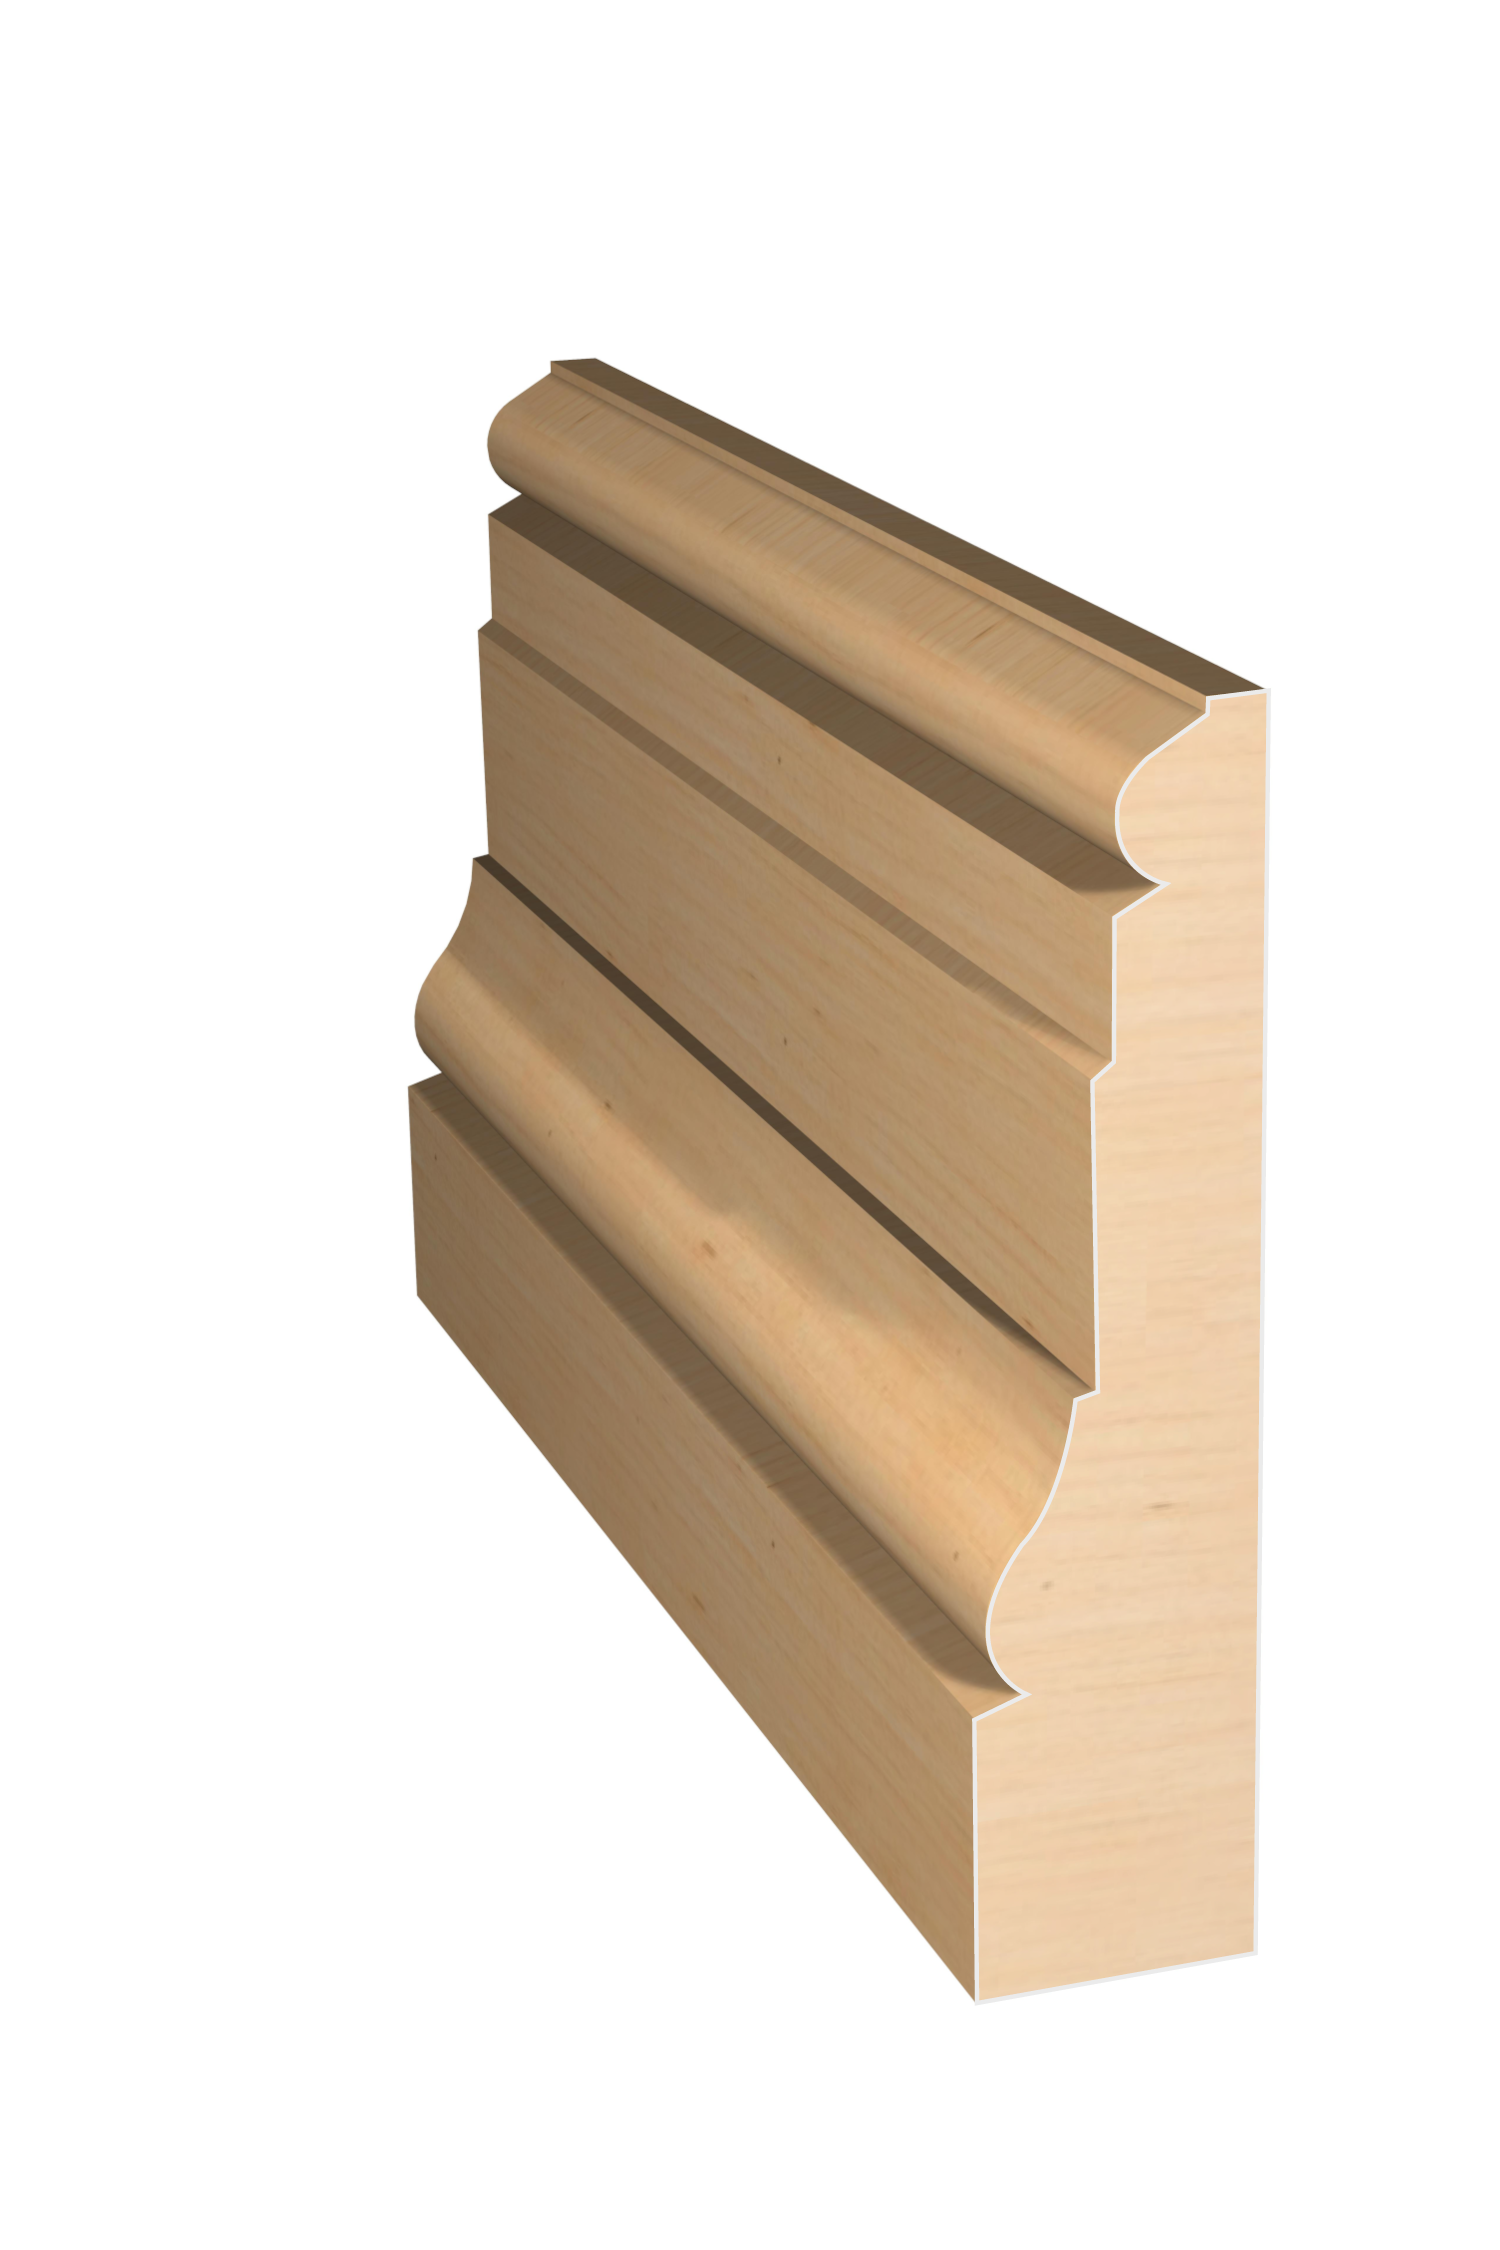 Three dimensional rendering of custom casing wood molding CAPL31237 made by Public Lumber Company in Detroit.